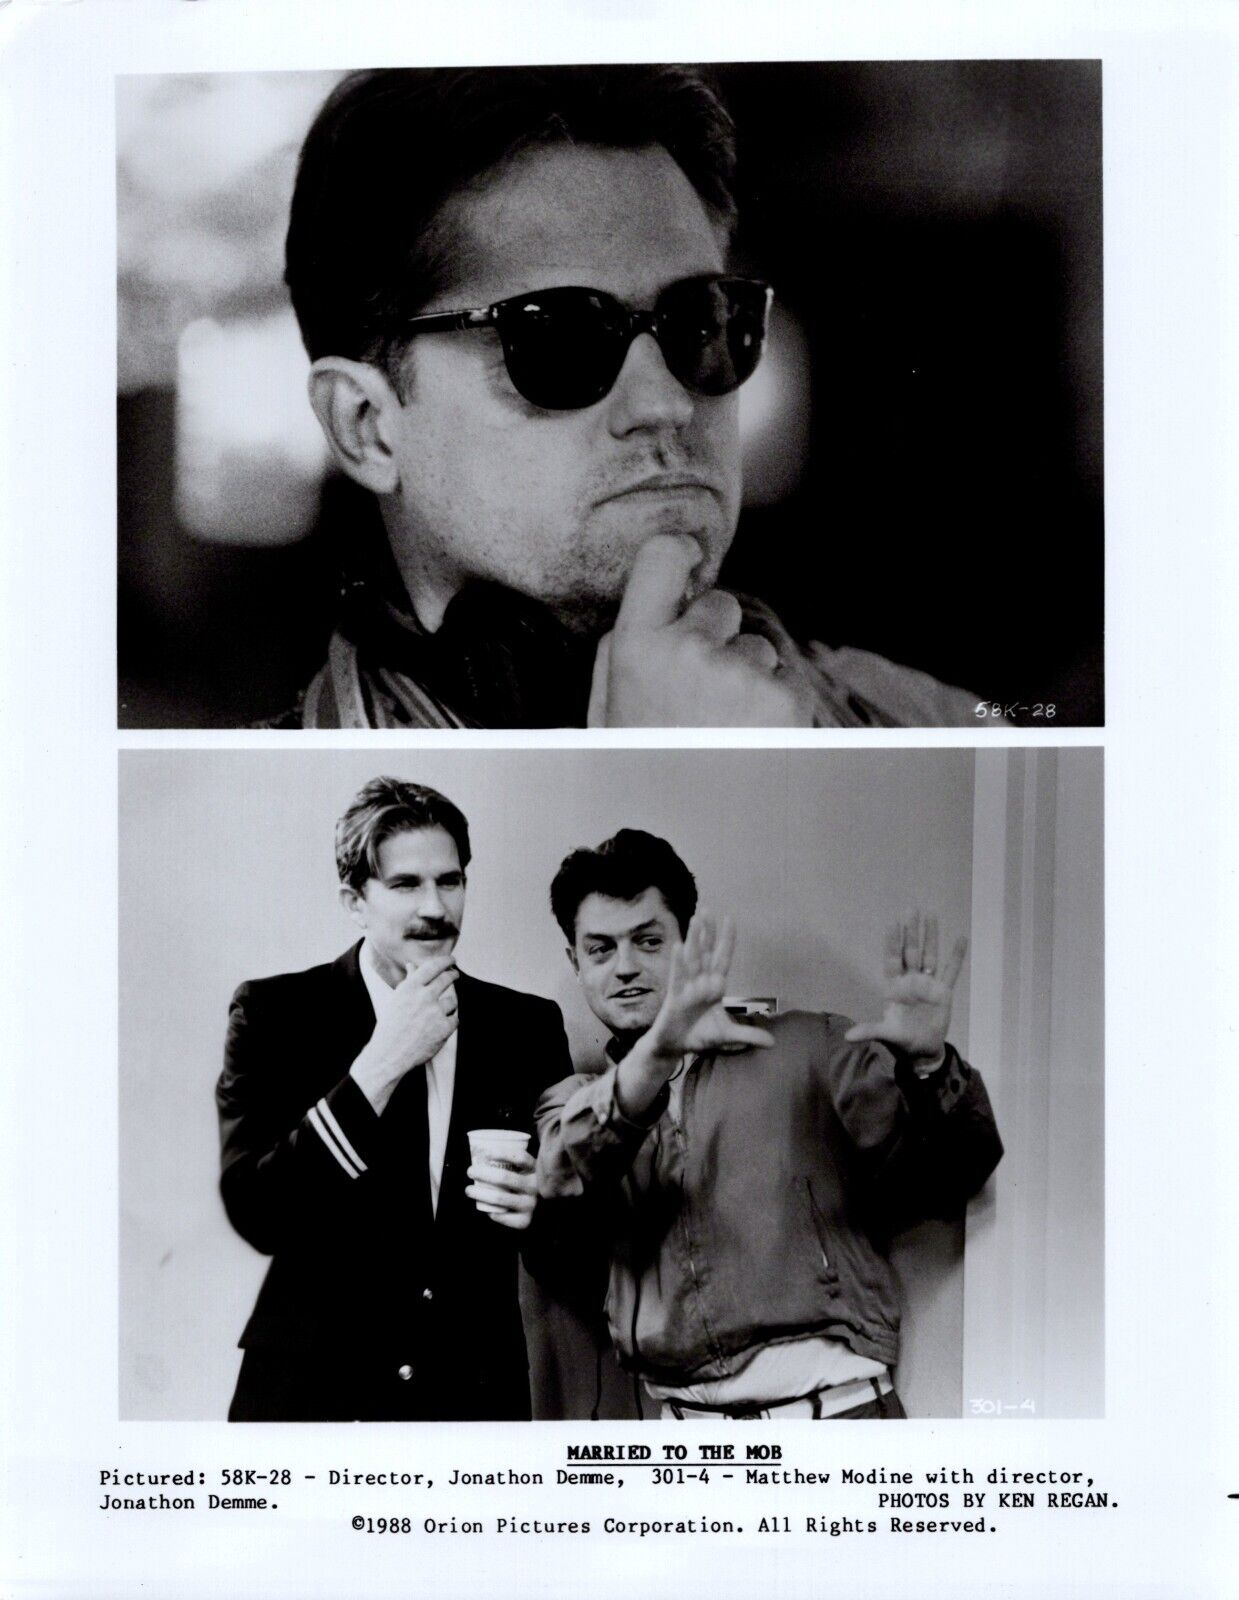 Jonathan Demme + Matthew Modine in Married to the Mob (1988) ❤ Photo K 472